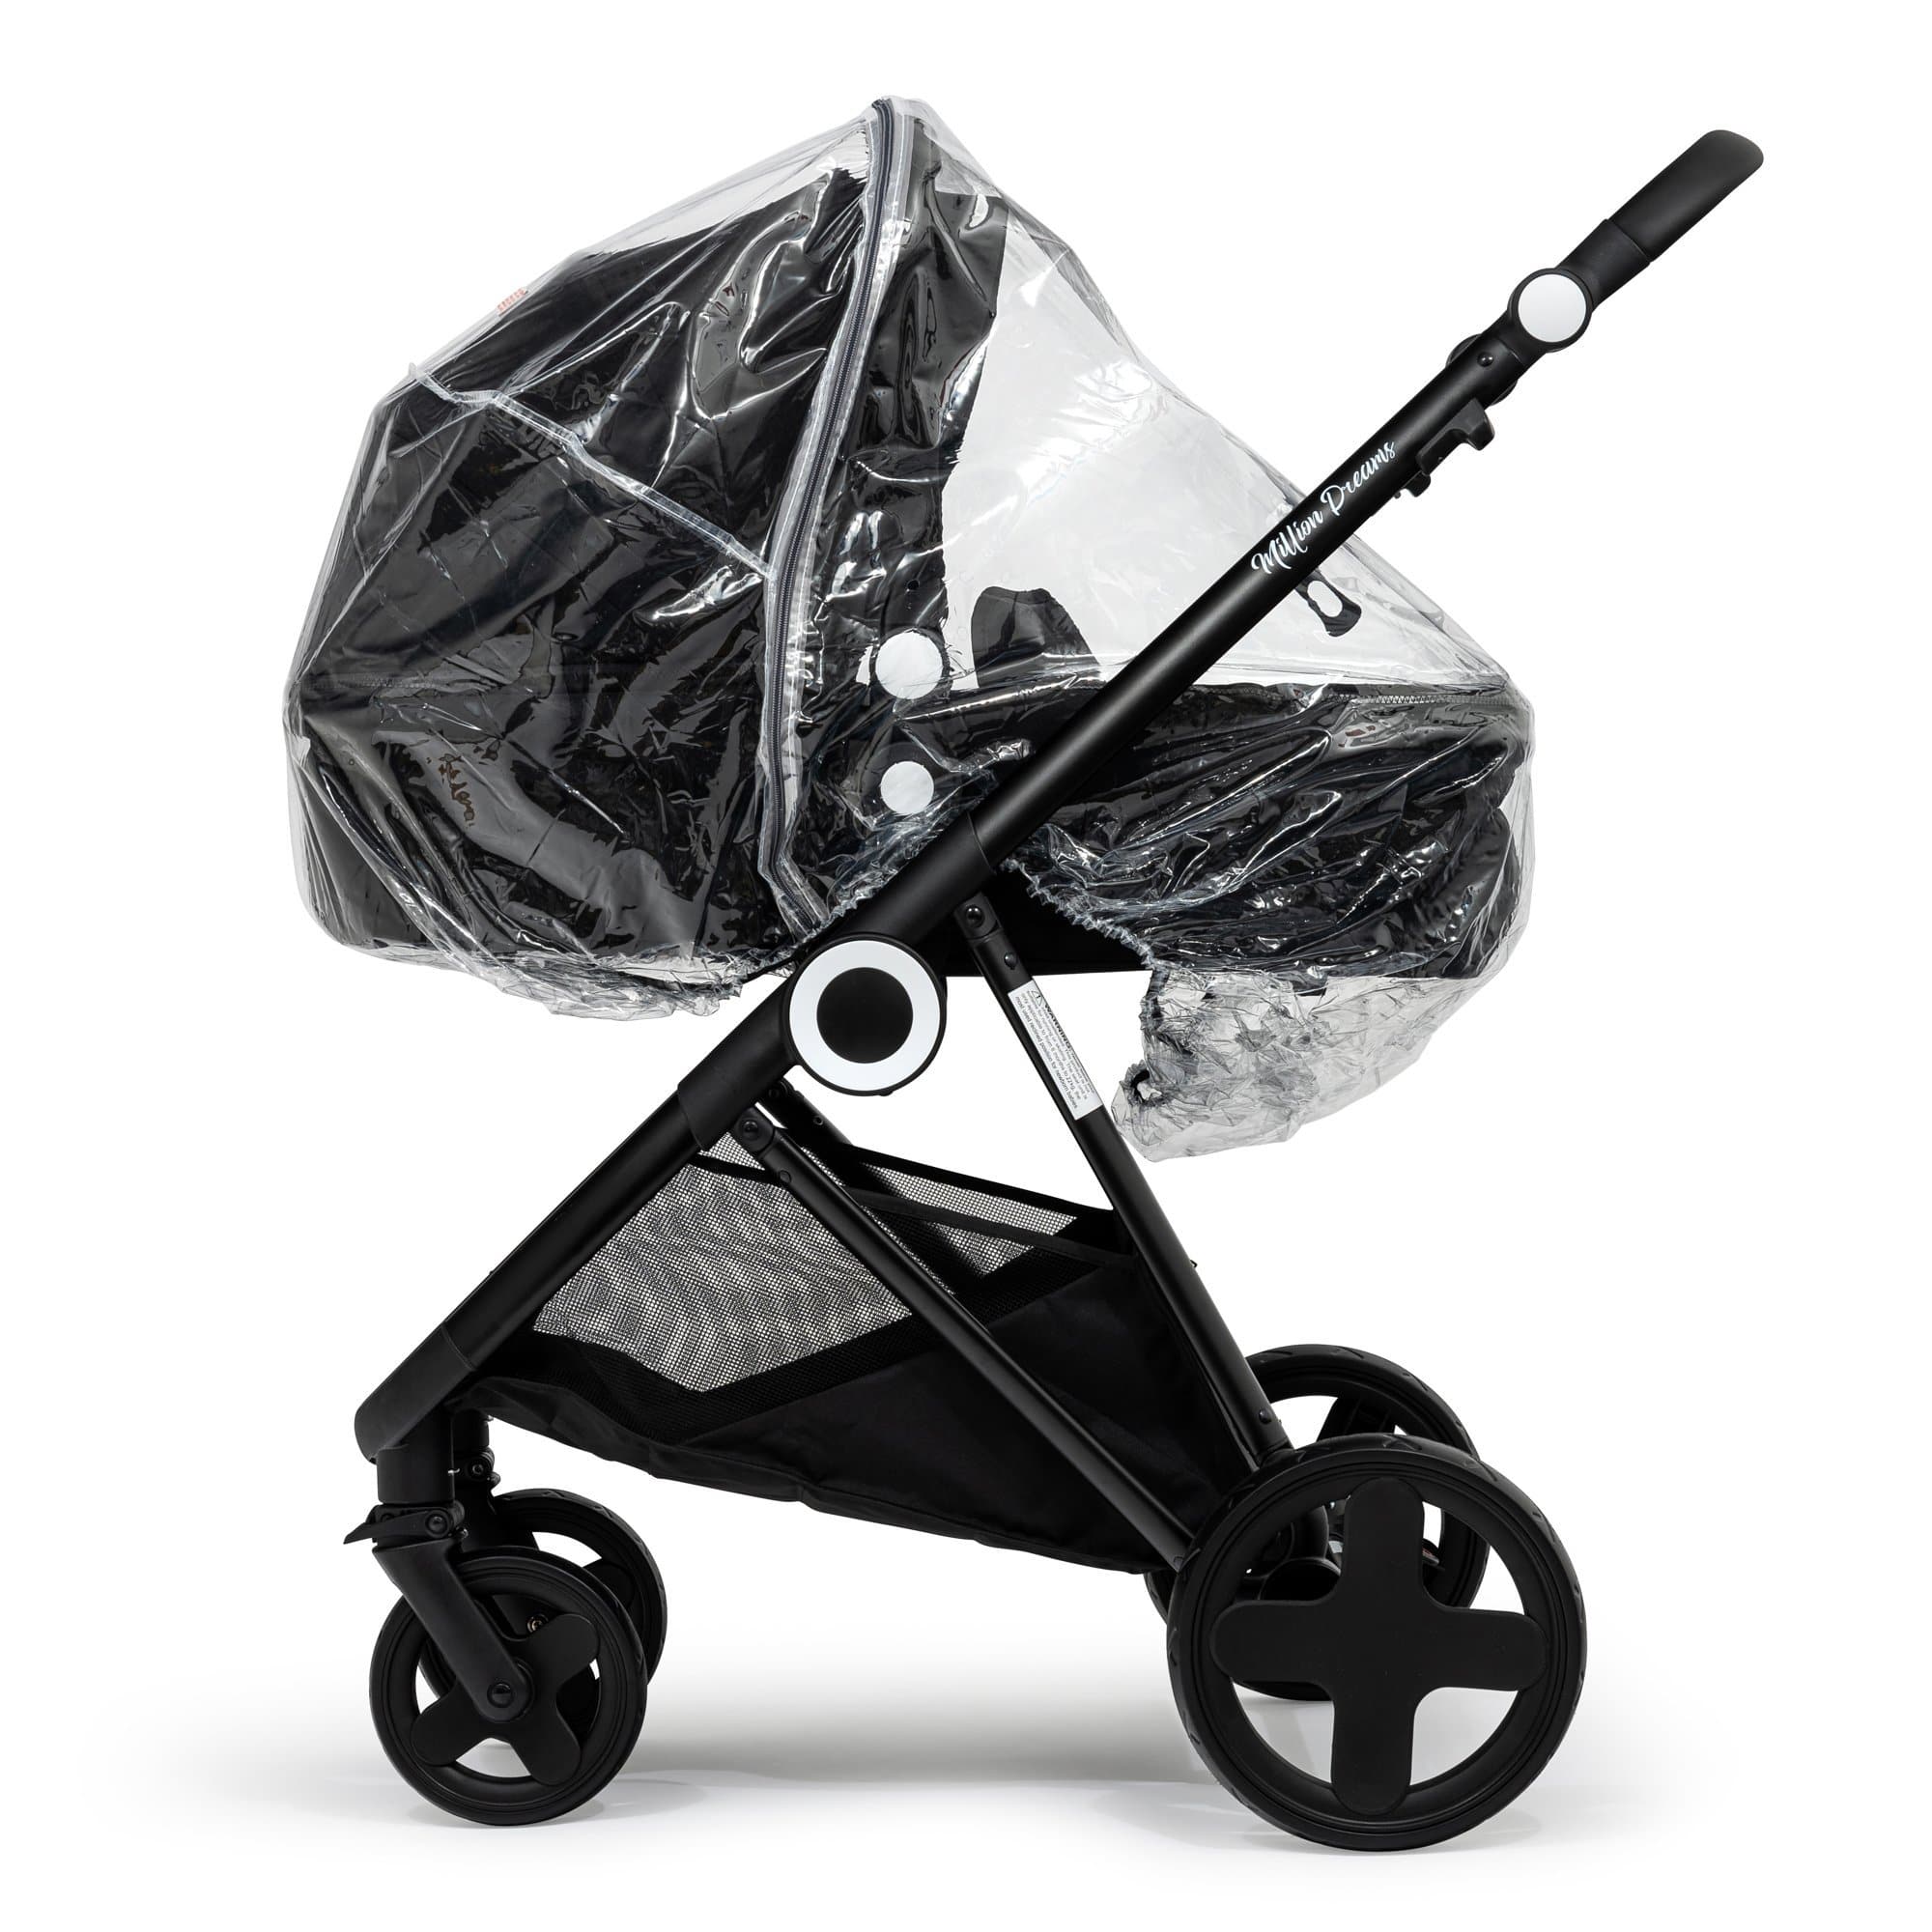 2 in 1 Rain Cover Compatible with Little Shield - Fits All Models - For Your Little One